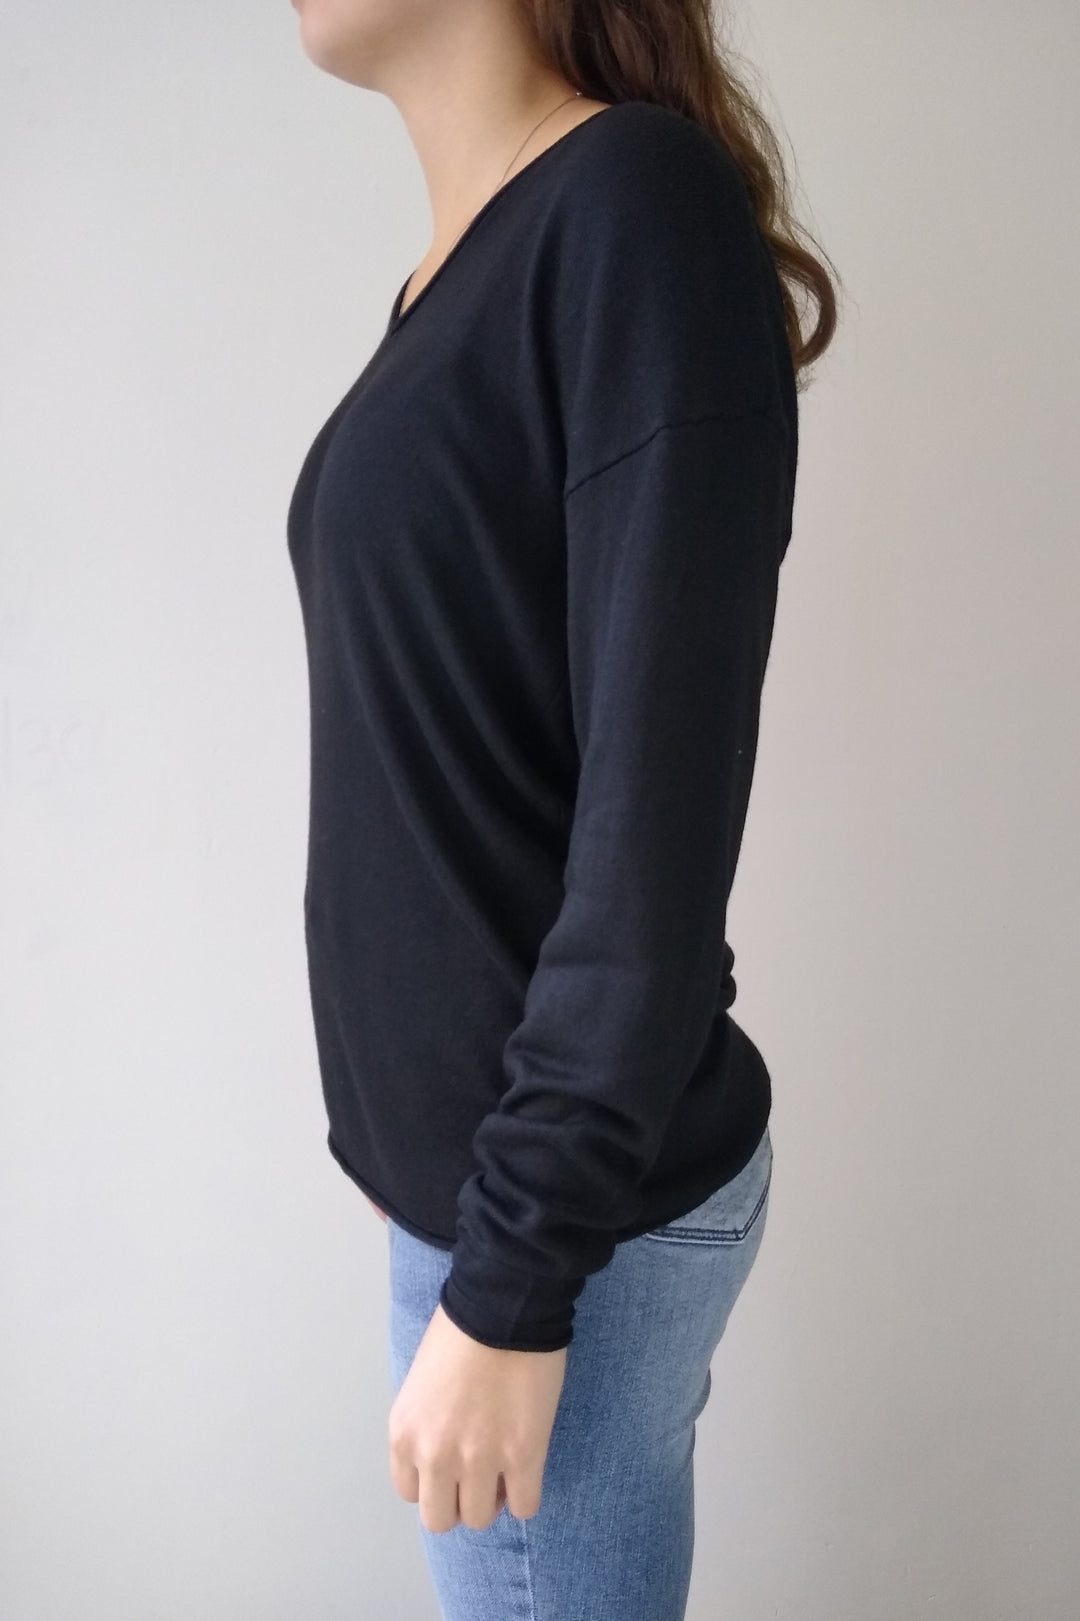 Staccato Black Relaxed V Neck Sweater